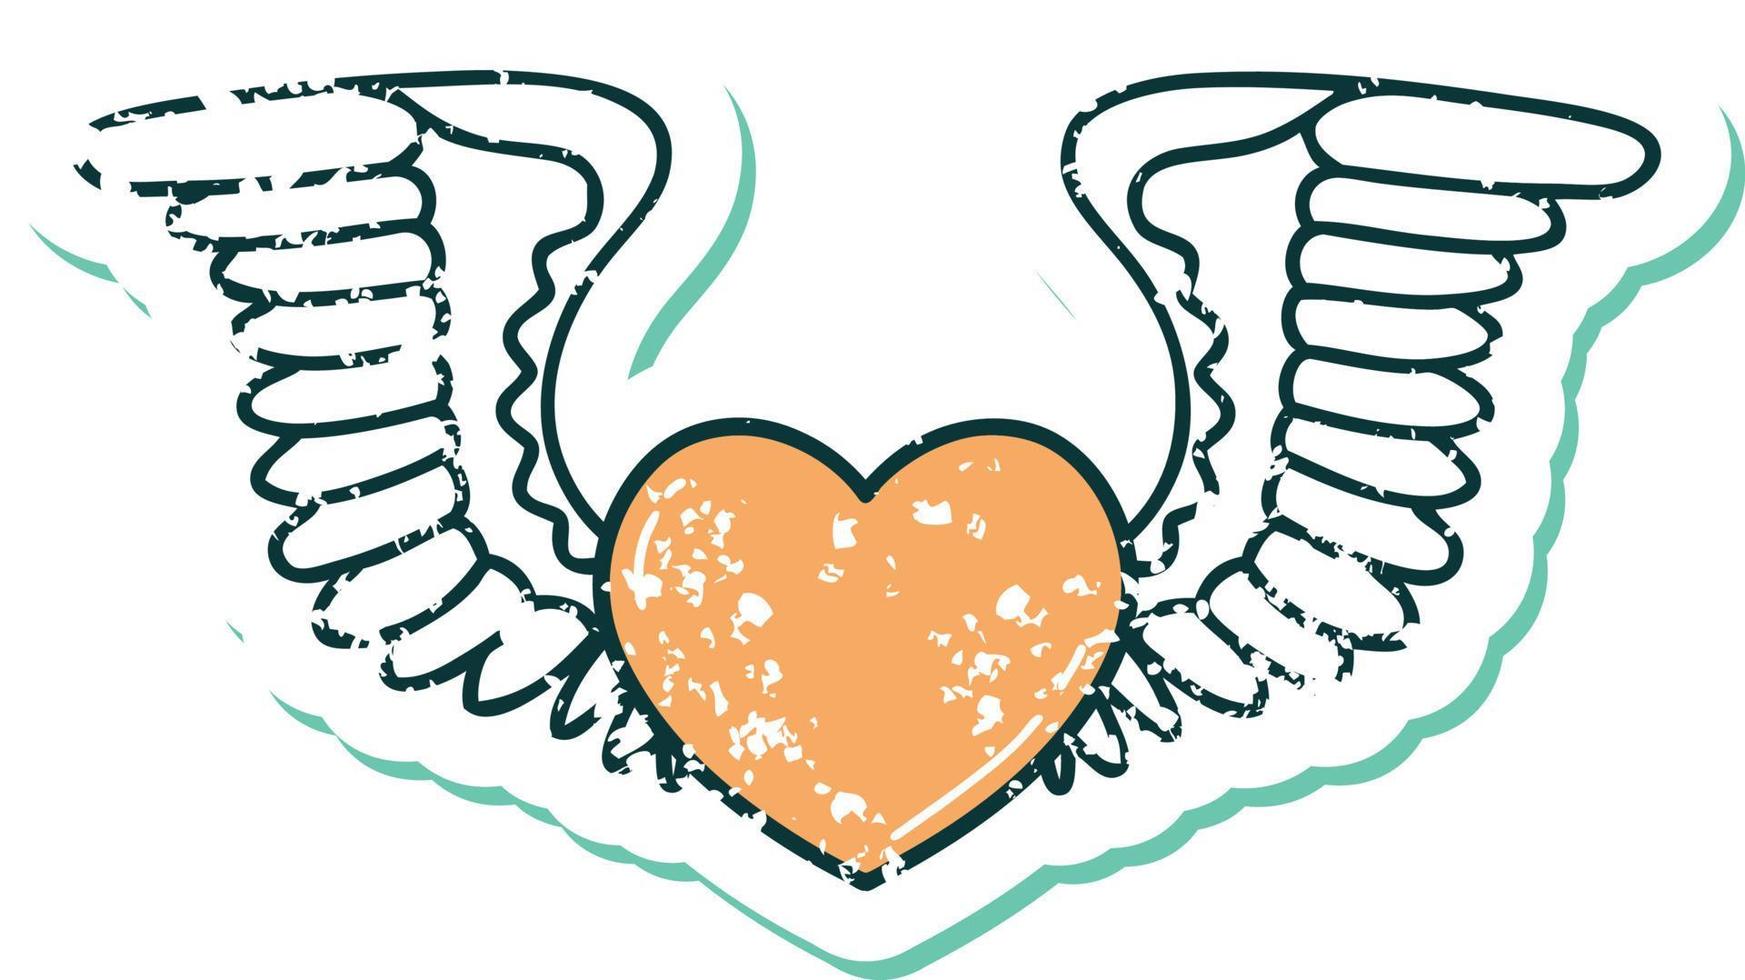 iconic distressed sticker tattoo style image of a heart with wings vector